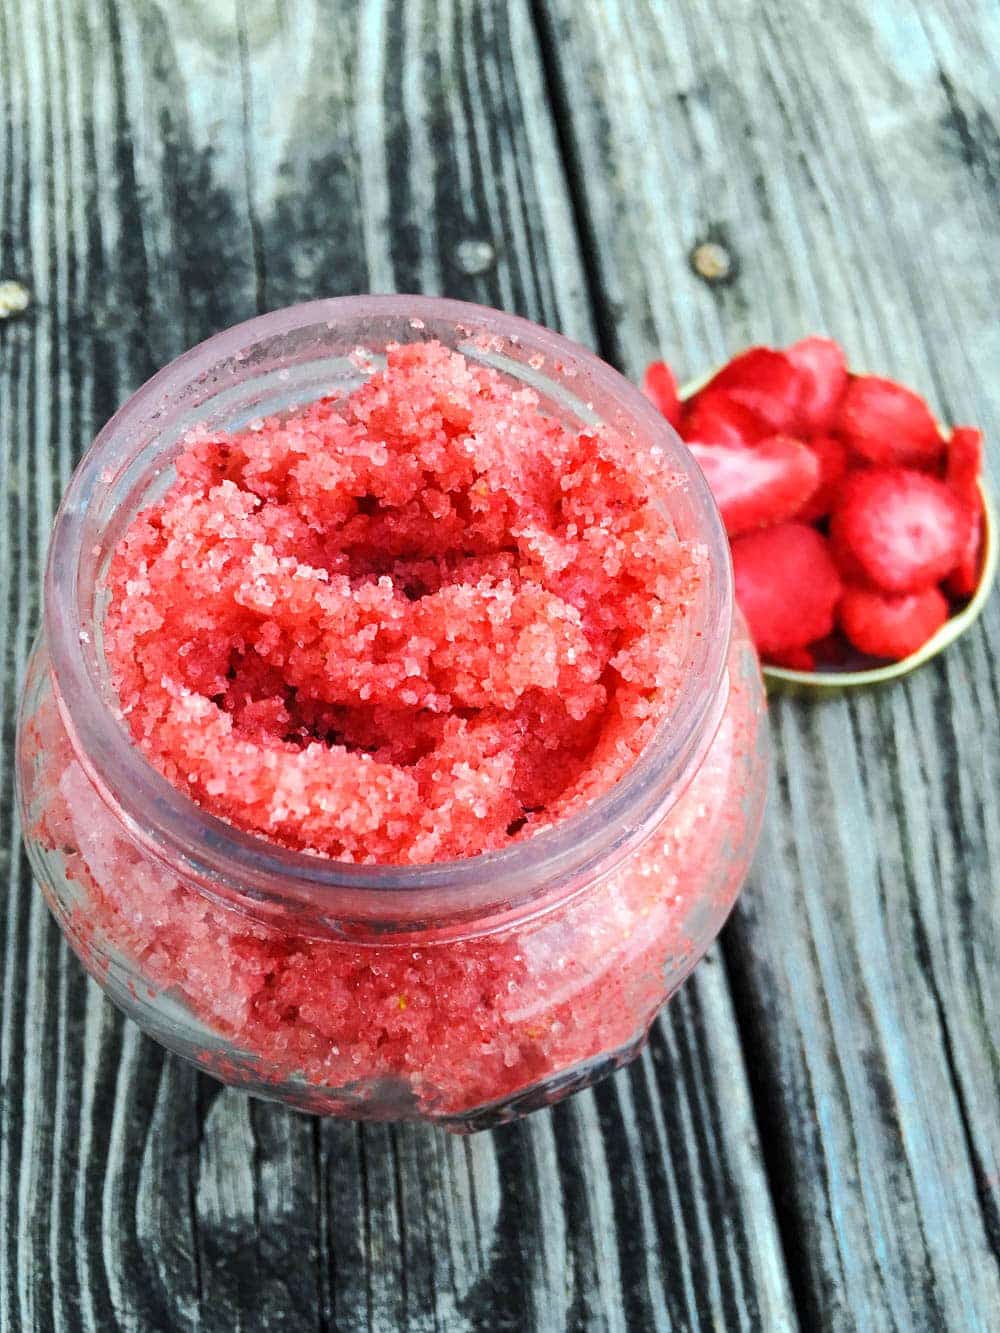 How to Make Your Own Sugar Scrub At Home: A Simple DIY Guide